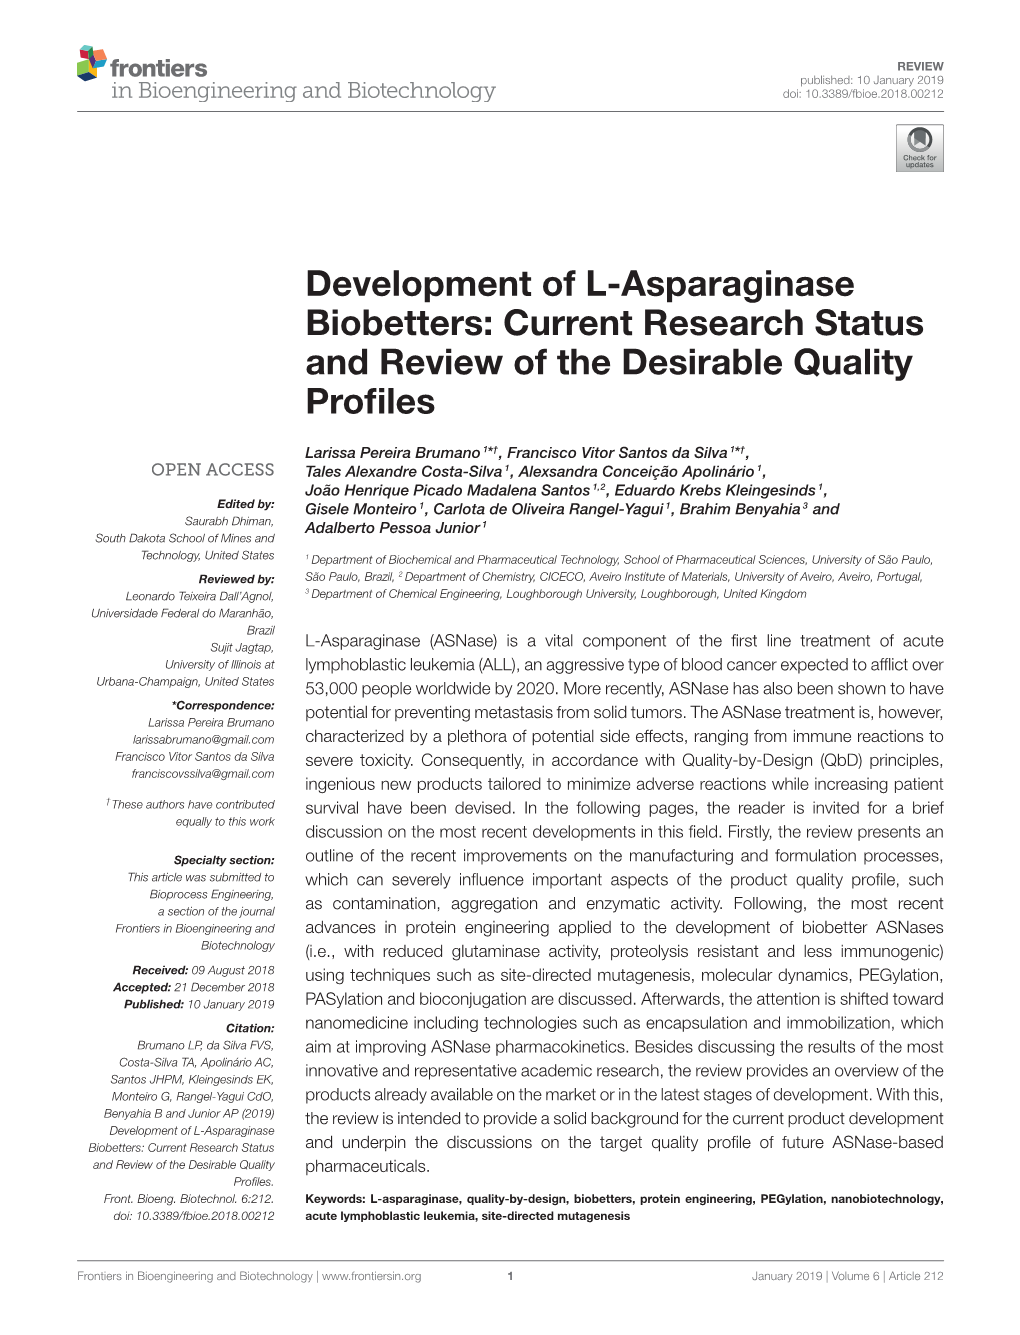 Development of L-Asparaginase Biobetters: Current Research Status and Review of the Desirable Quality Proﬁles